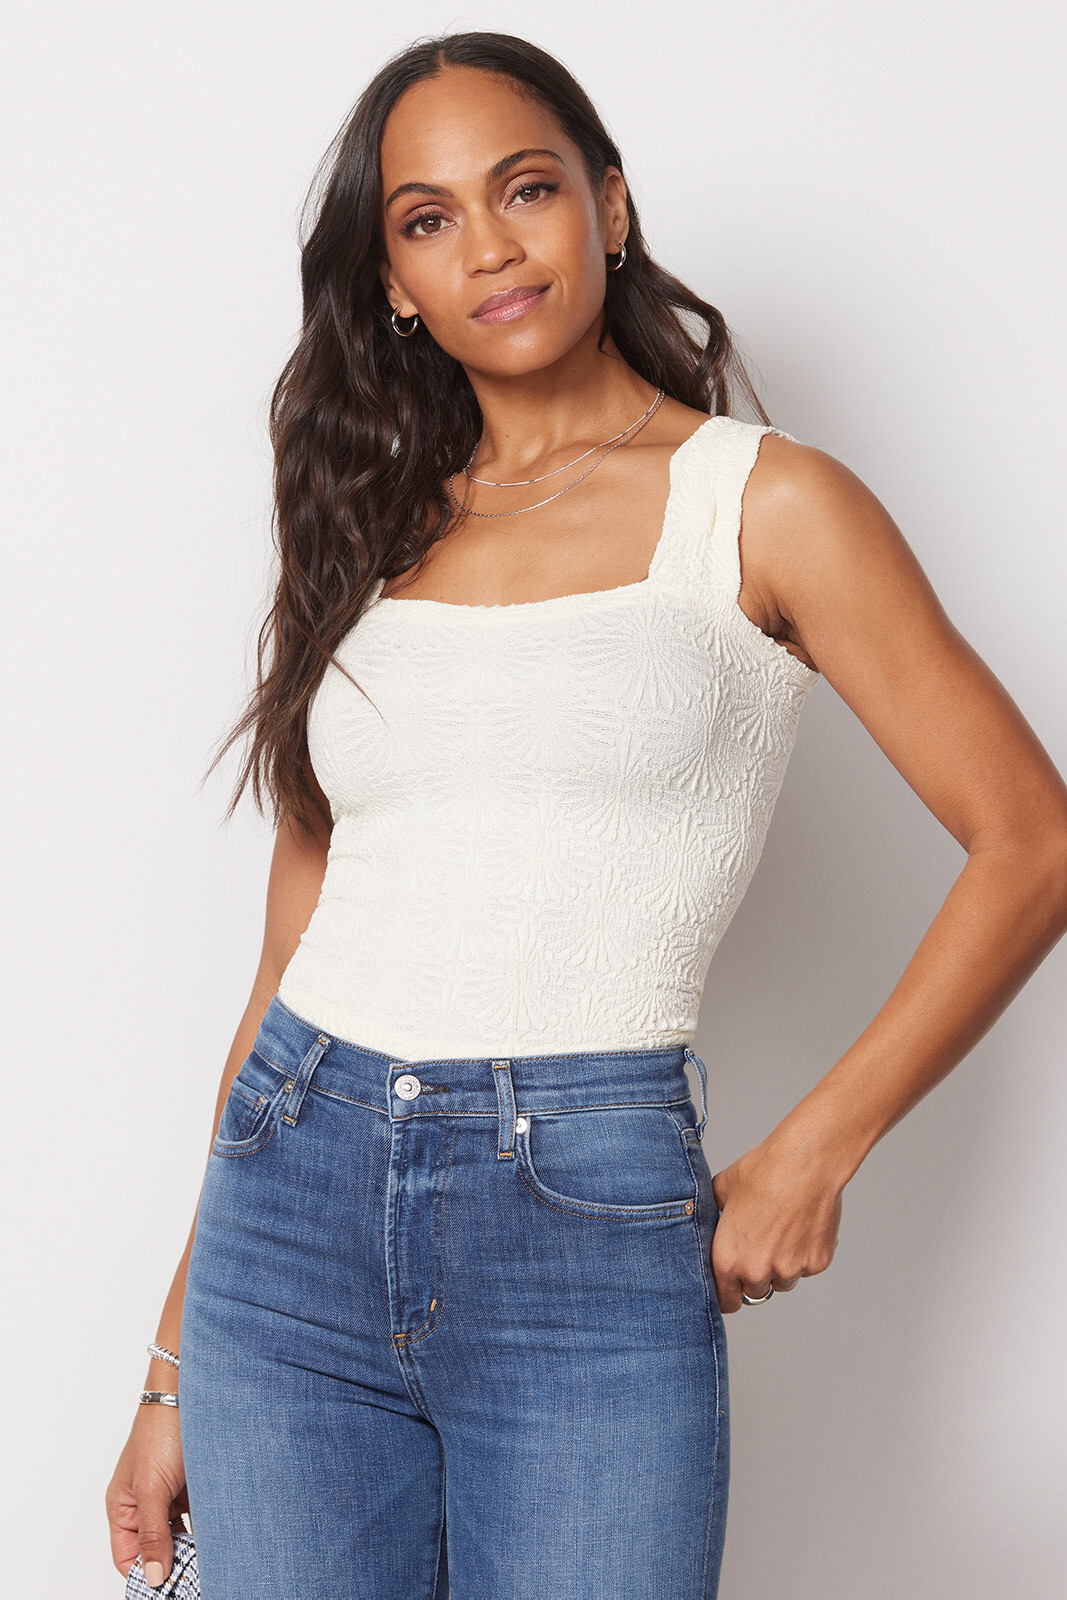 Free People Love Letter Cropped Cami Tank Top - Women's Tank Tops